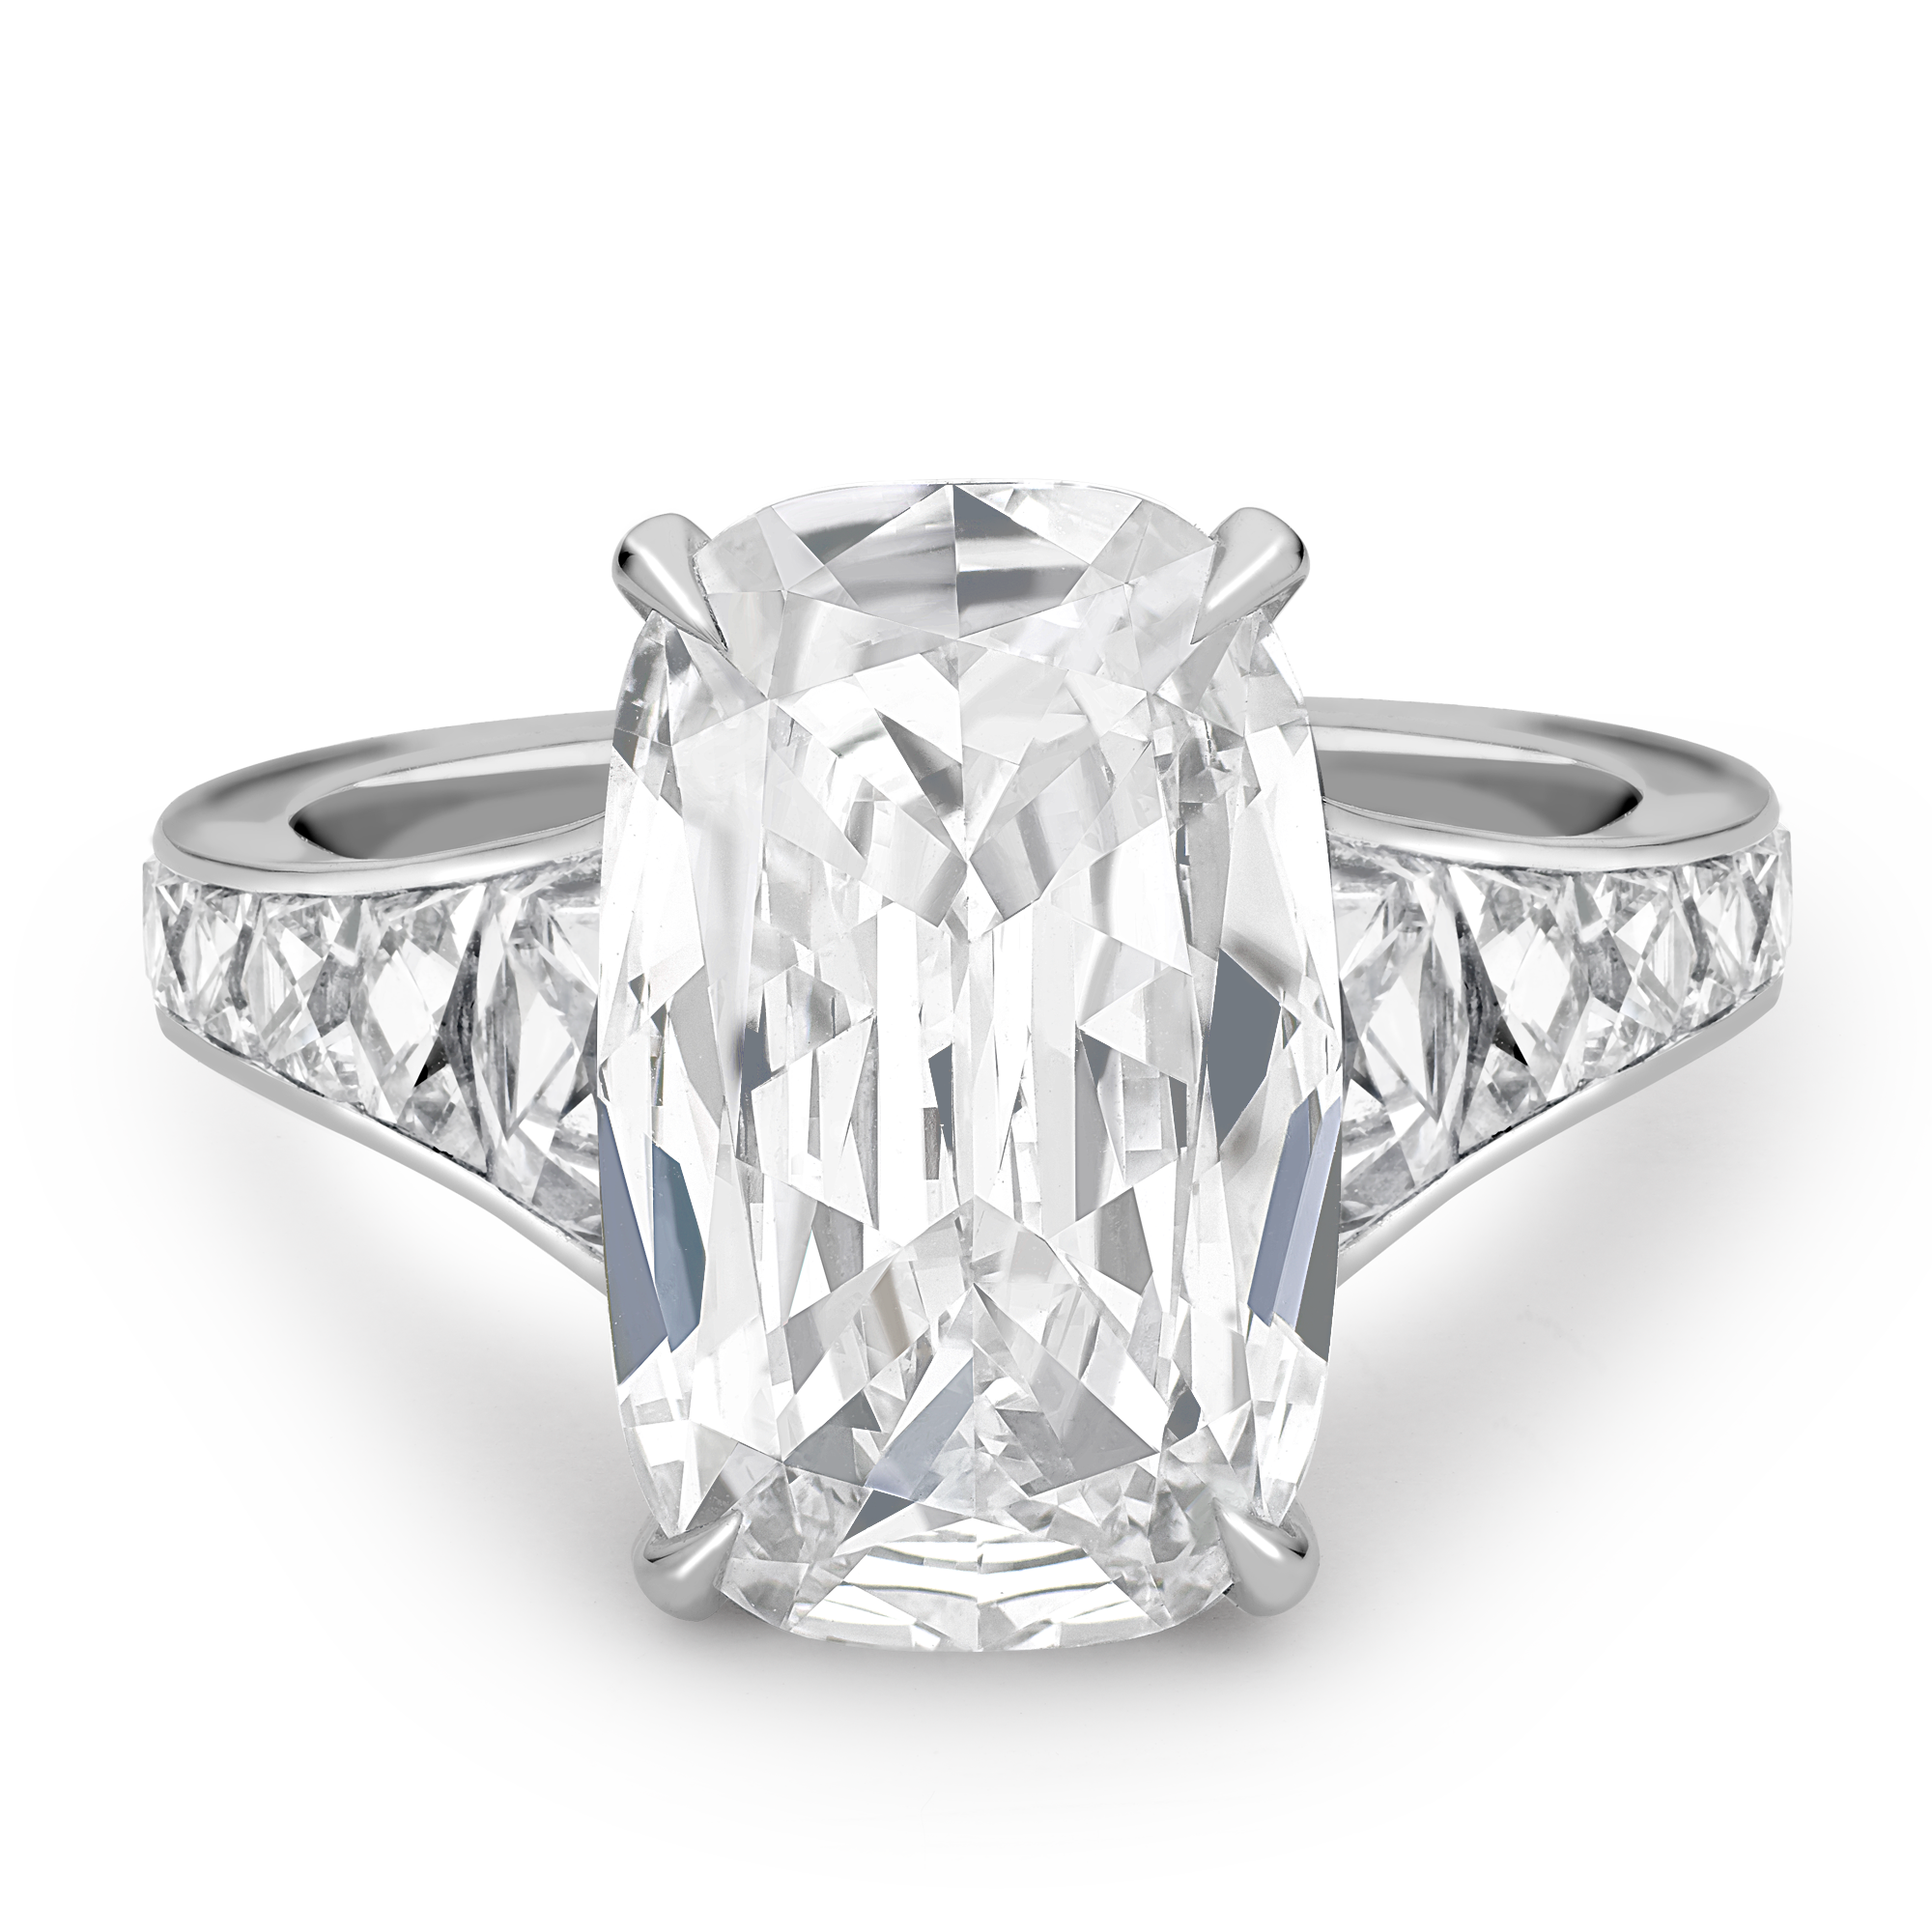 Masterpiece Pragnell Setting Antique Cushion cut Diamond Ring Four Claw Cushion cut Diamond with Twelve stone Tapered French cut Diamond set Shoulders_2